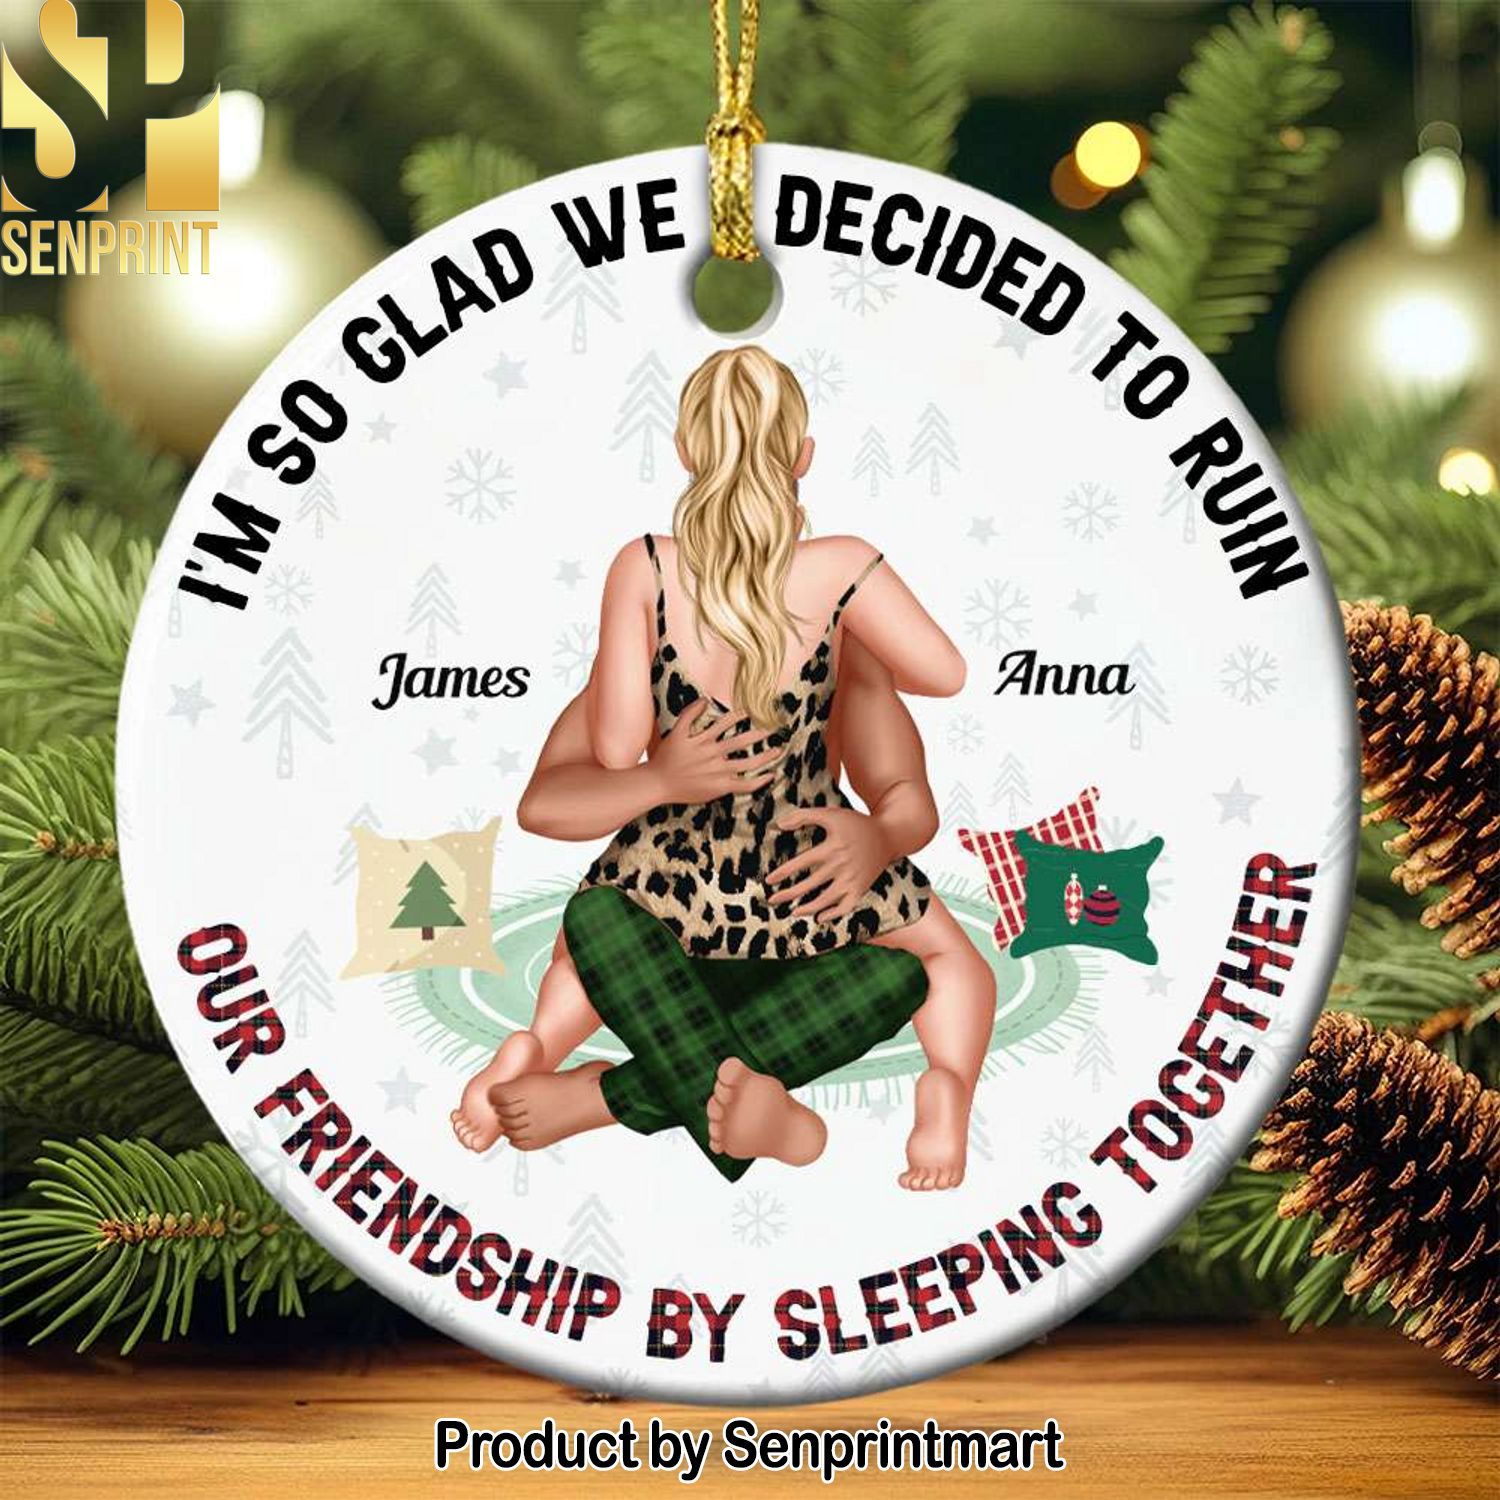 I’m So Glad We Decided To Ruin Our Friendship, Couple Gift, Personalized Ceramic Ornament, Funny Couple Ornament, Christmas Gift